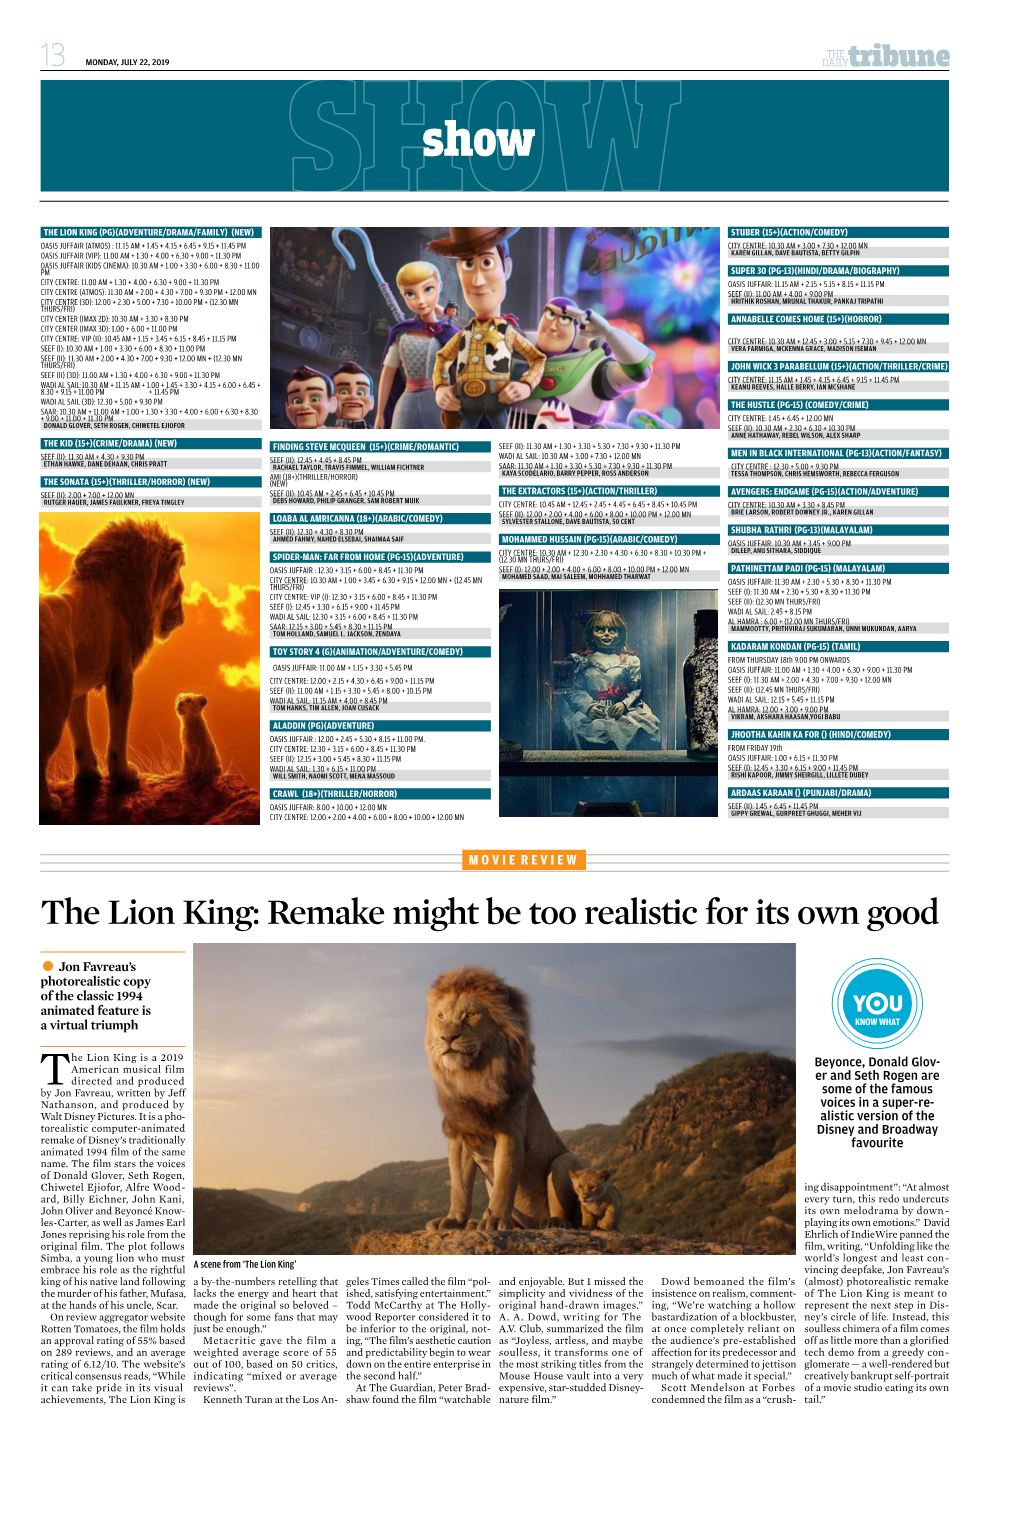 The Lion King: Remake Might Be Too Realistic for Its Own Good